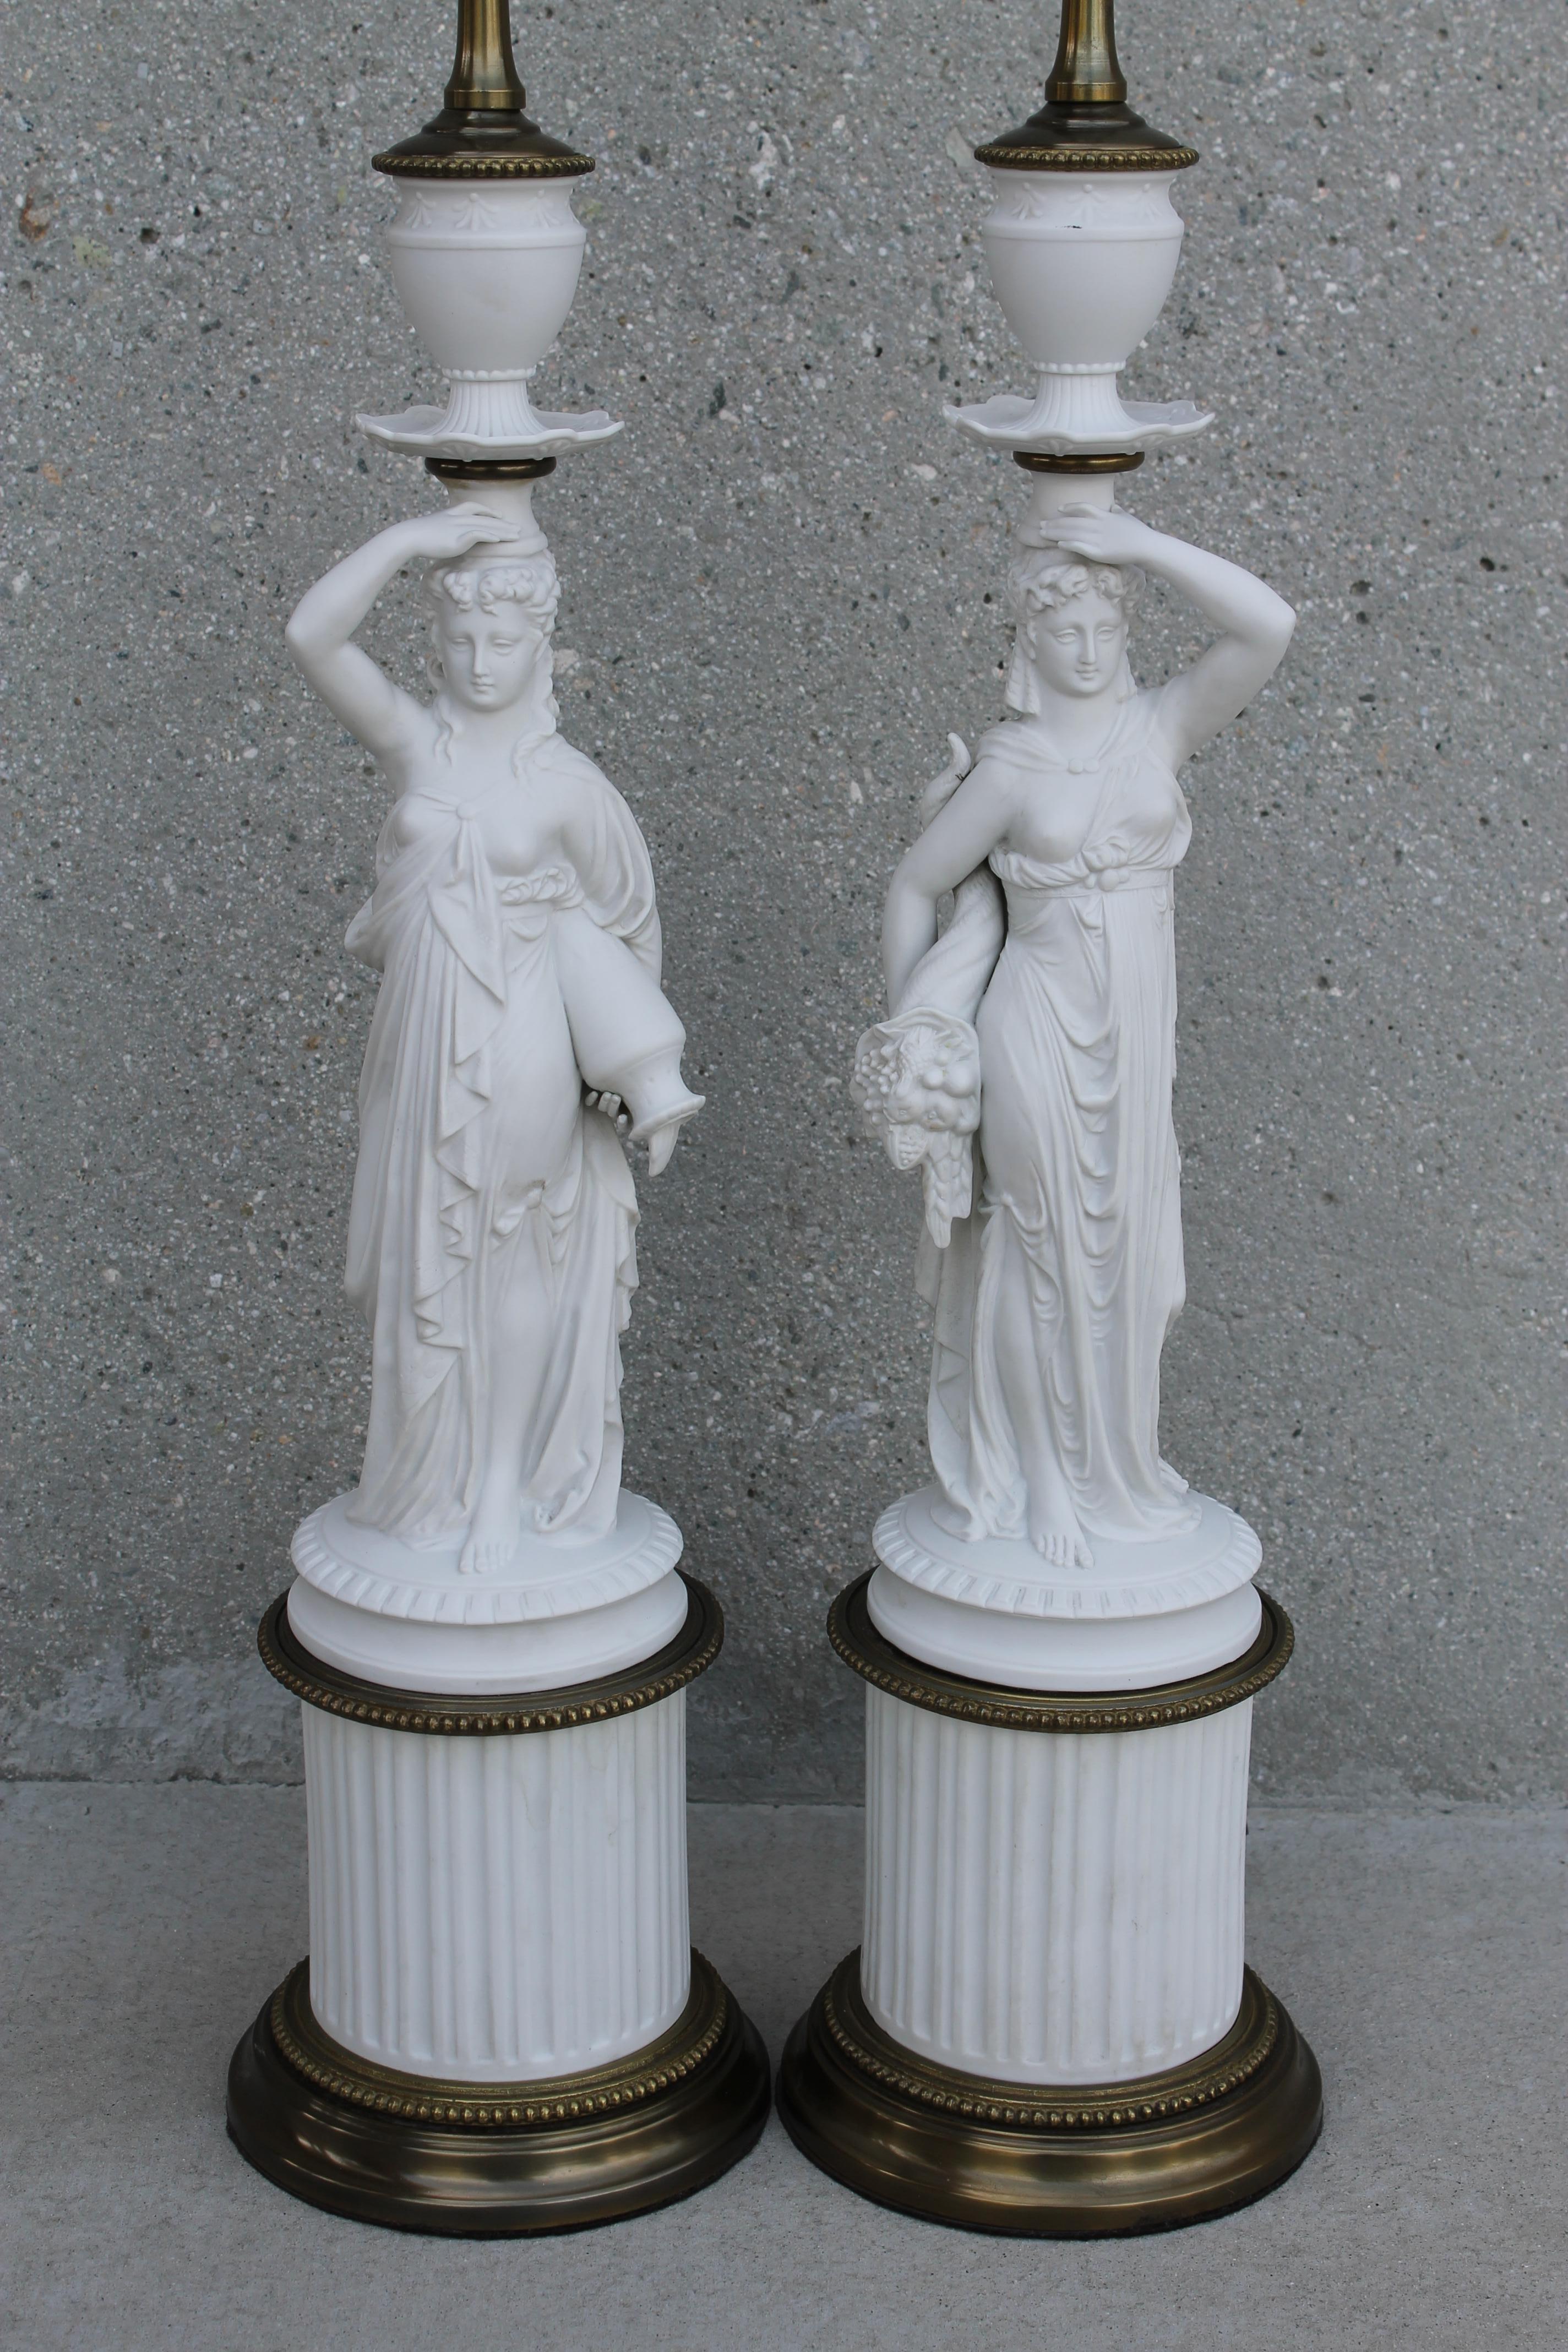 Pair of porcelain or Parian ware (is a type of biscuit porcelain imitating marble) Greek goddess lamps. One is Demeter, the goddess holding a cornucopia and the other is Iris, holding a jug of water. Demeter, the Greek goddess of Agriculture was